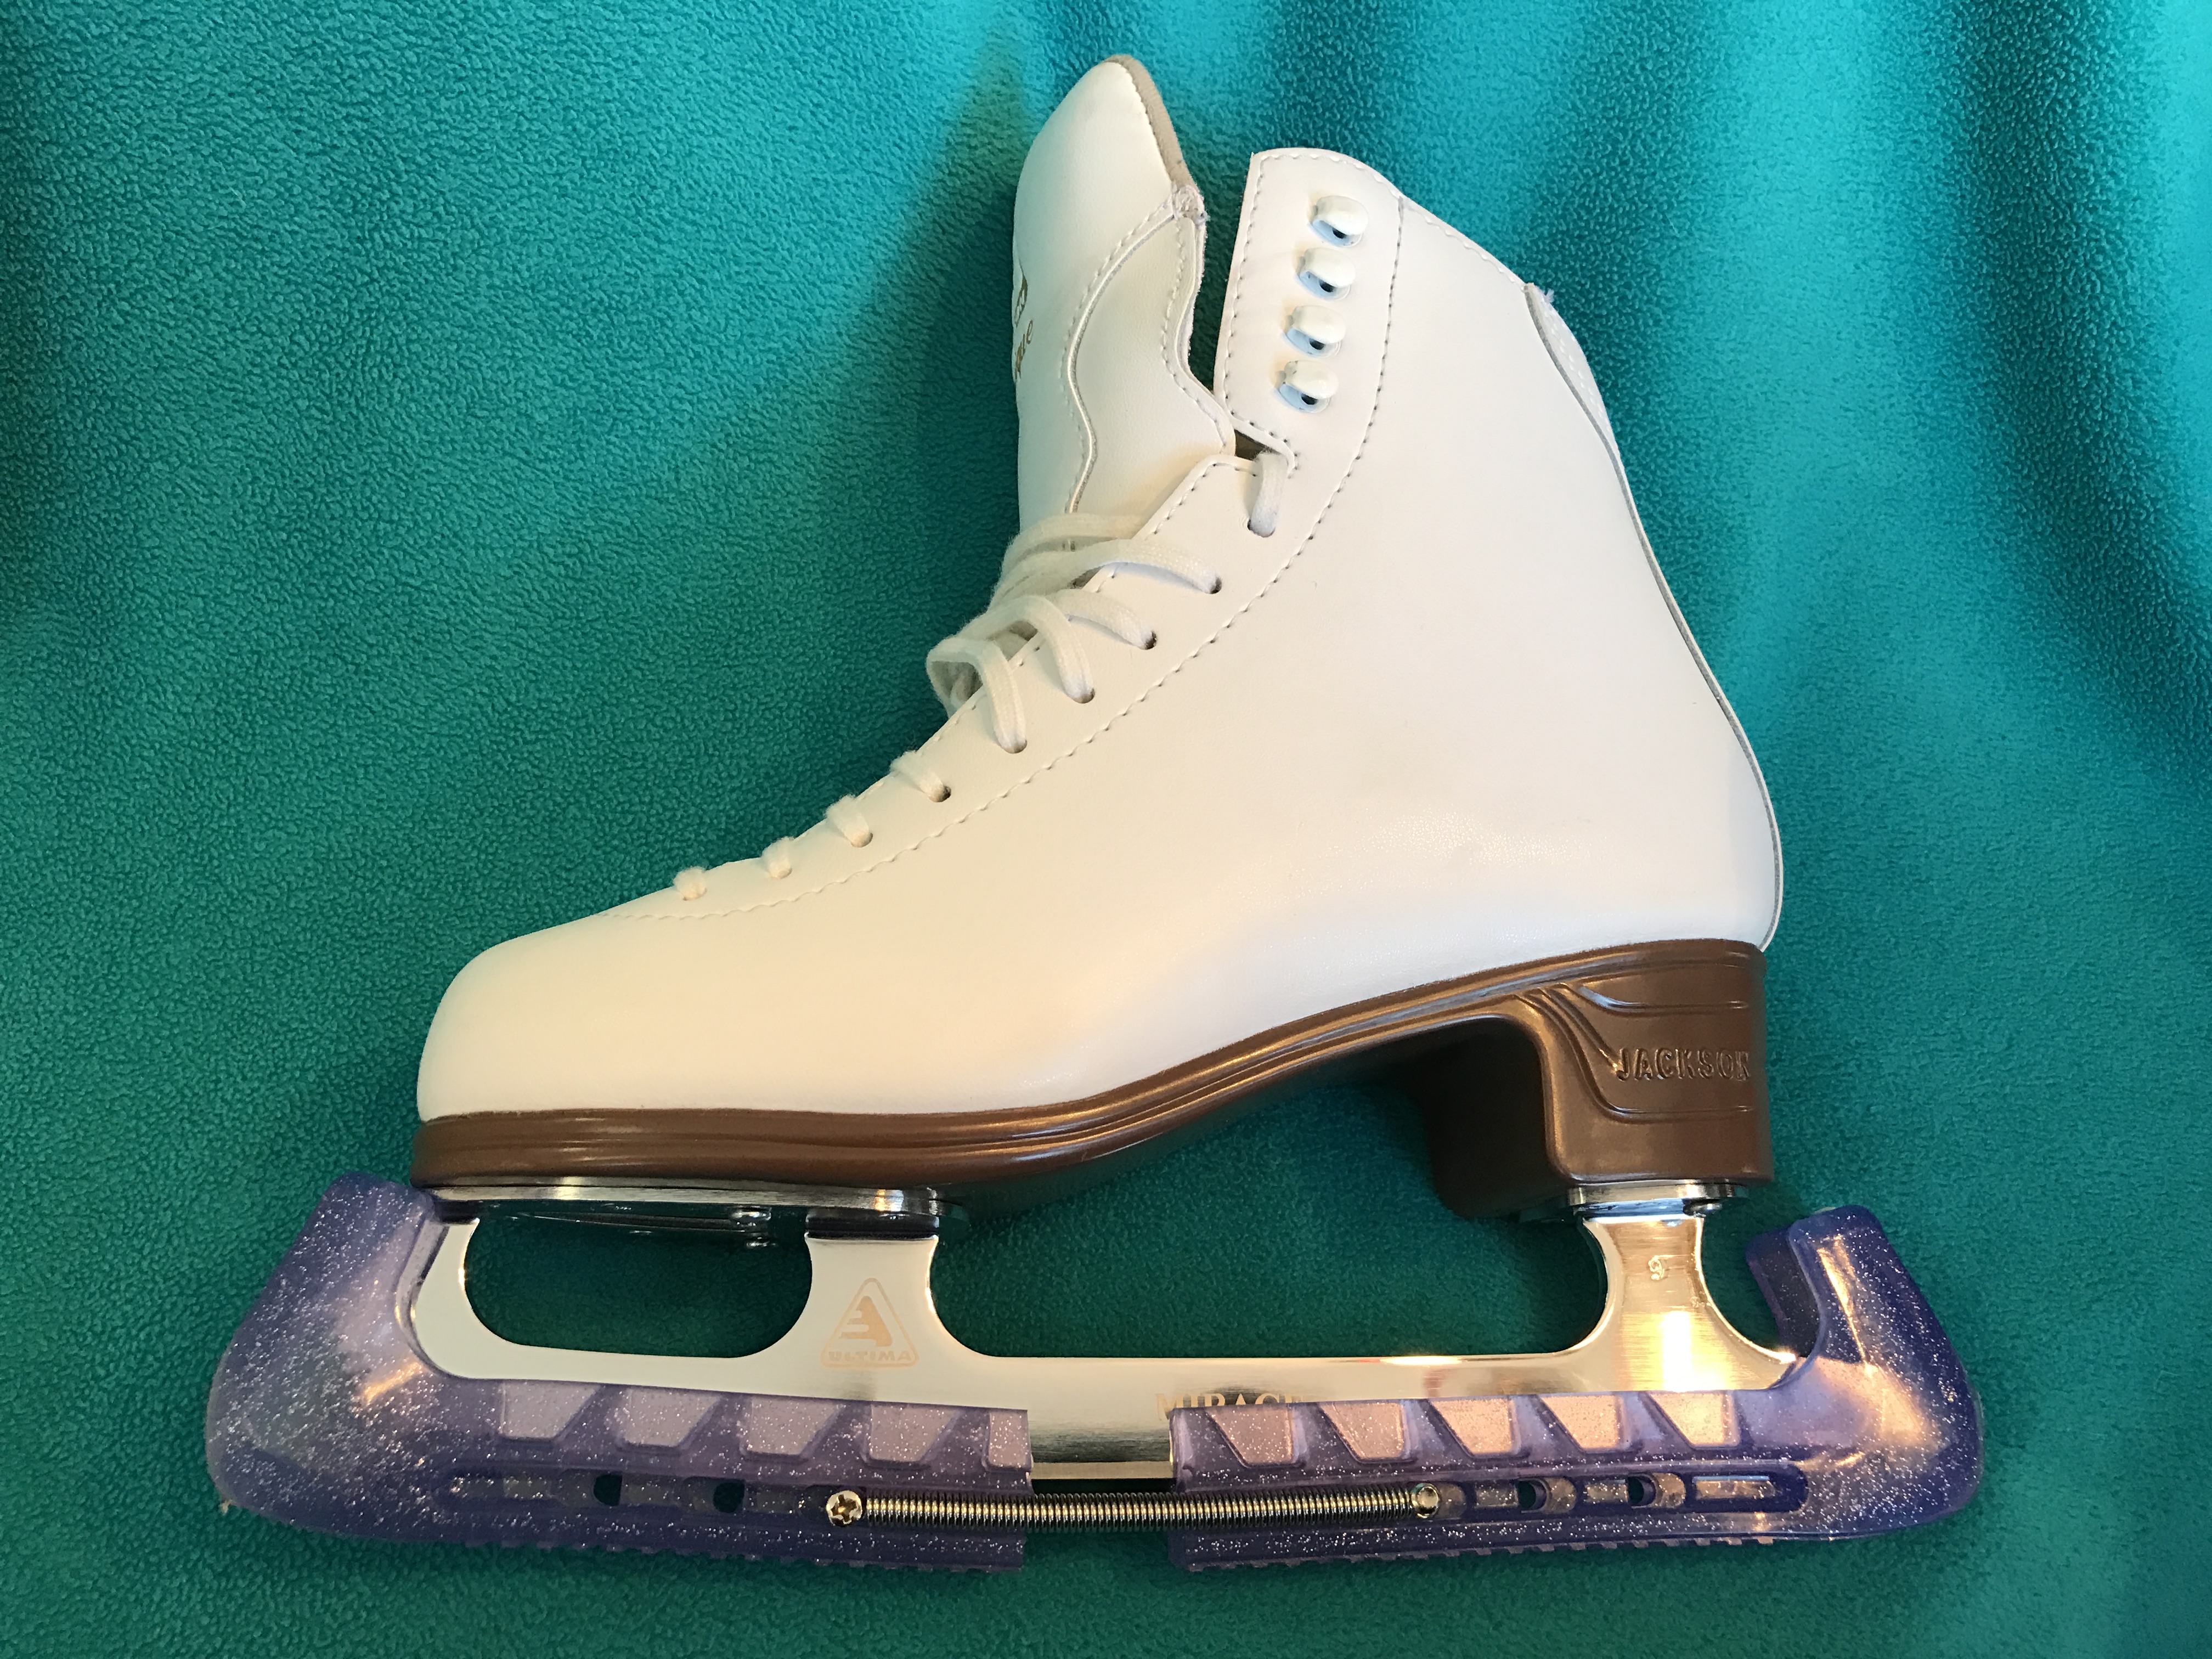 Ice Skate blade covers the toughest nylon protection P41 Protex guards 